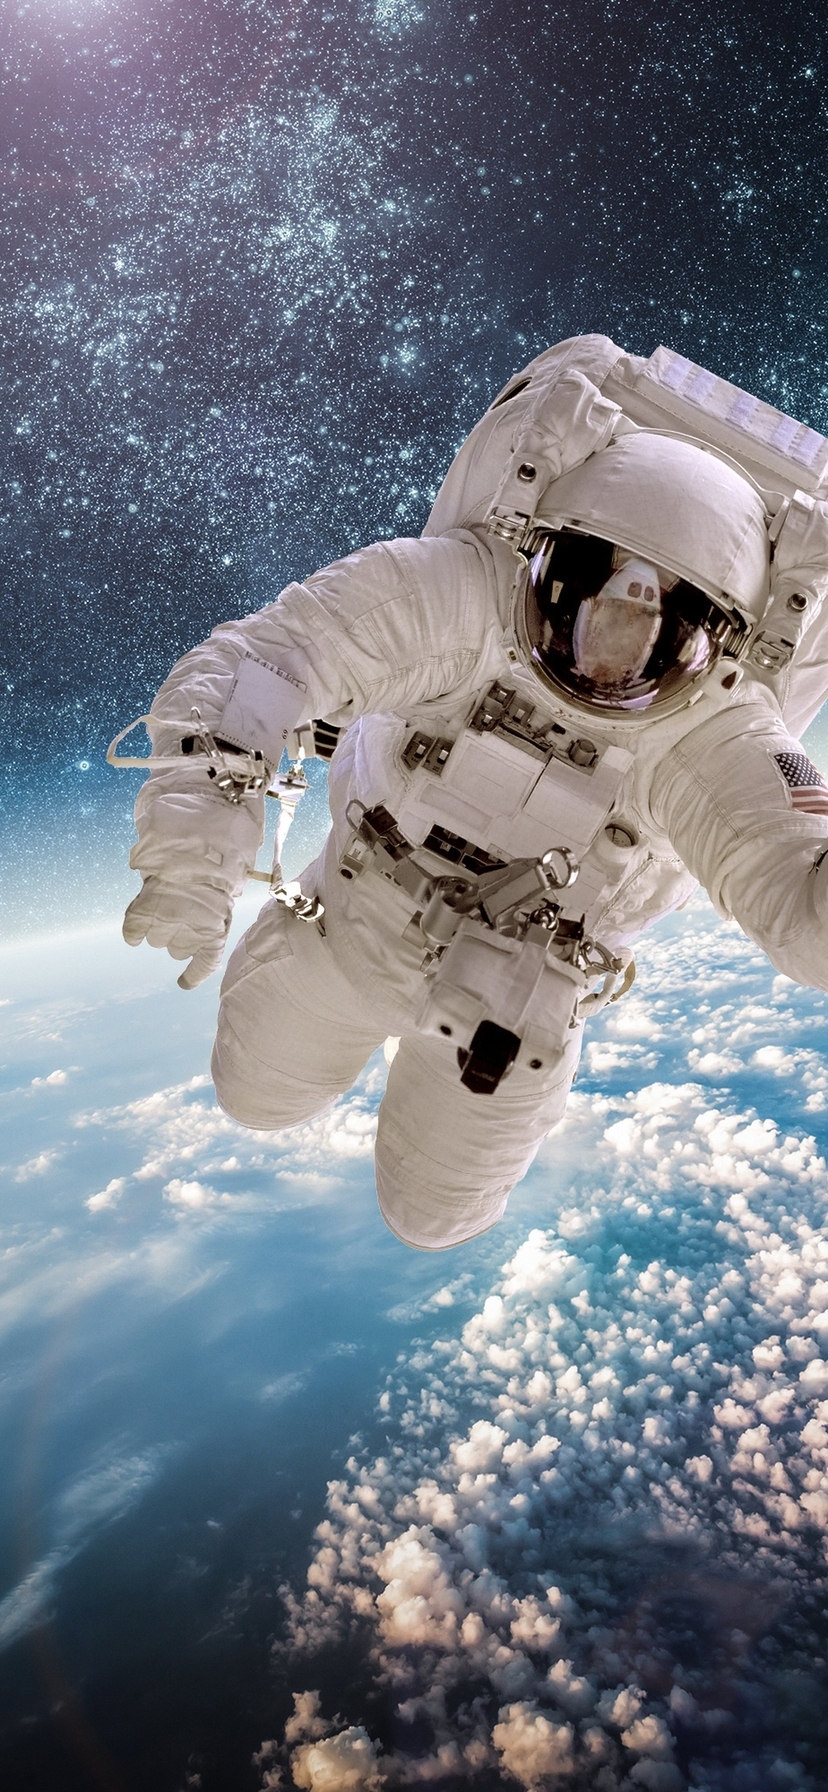 Image: Astronaut, cosmonaut, spacesuit, weightlessness, flight, galaxy, space, stars, clouds